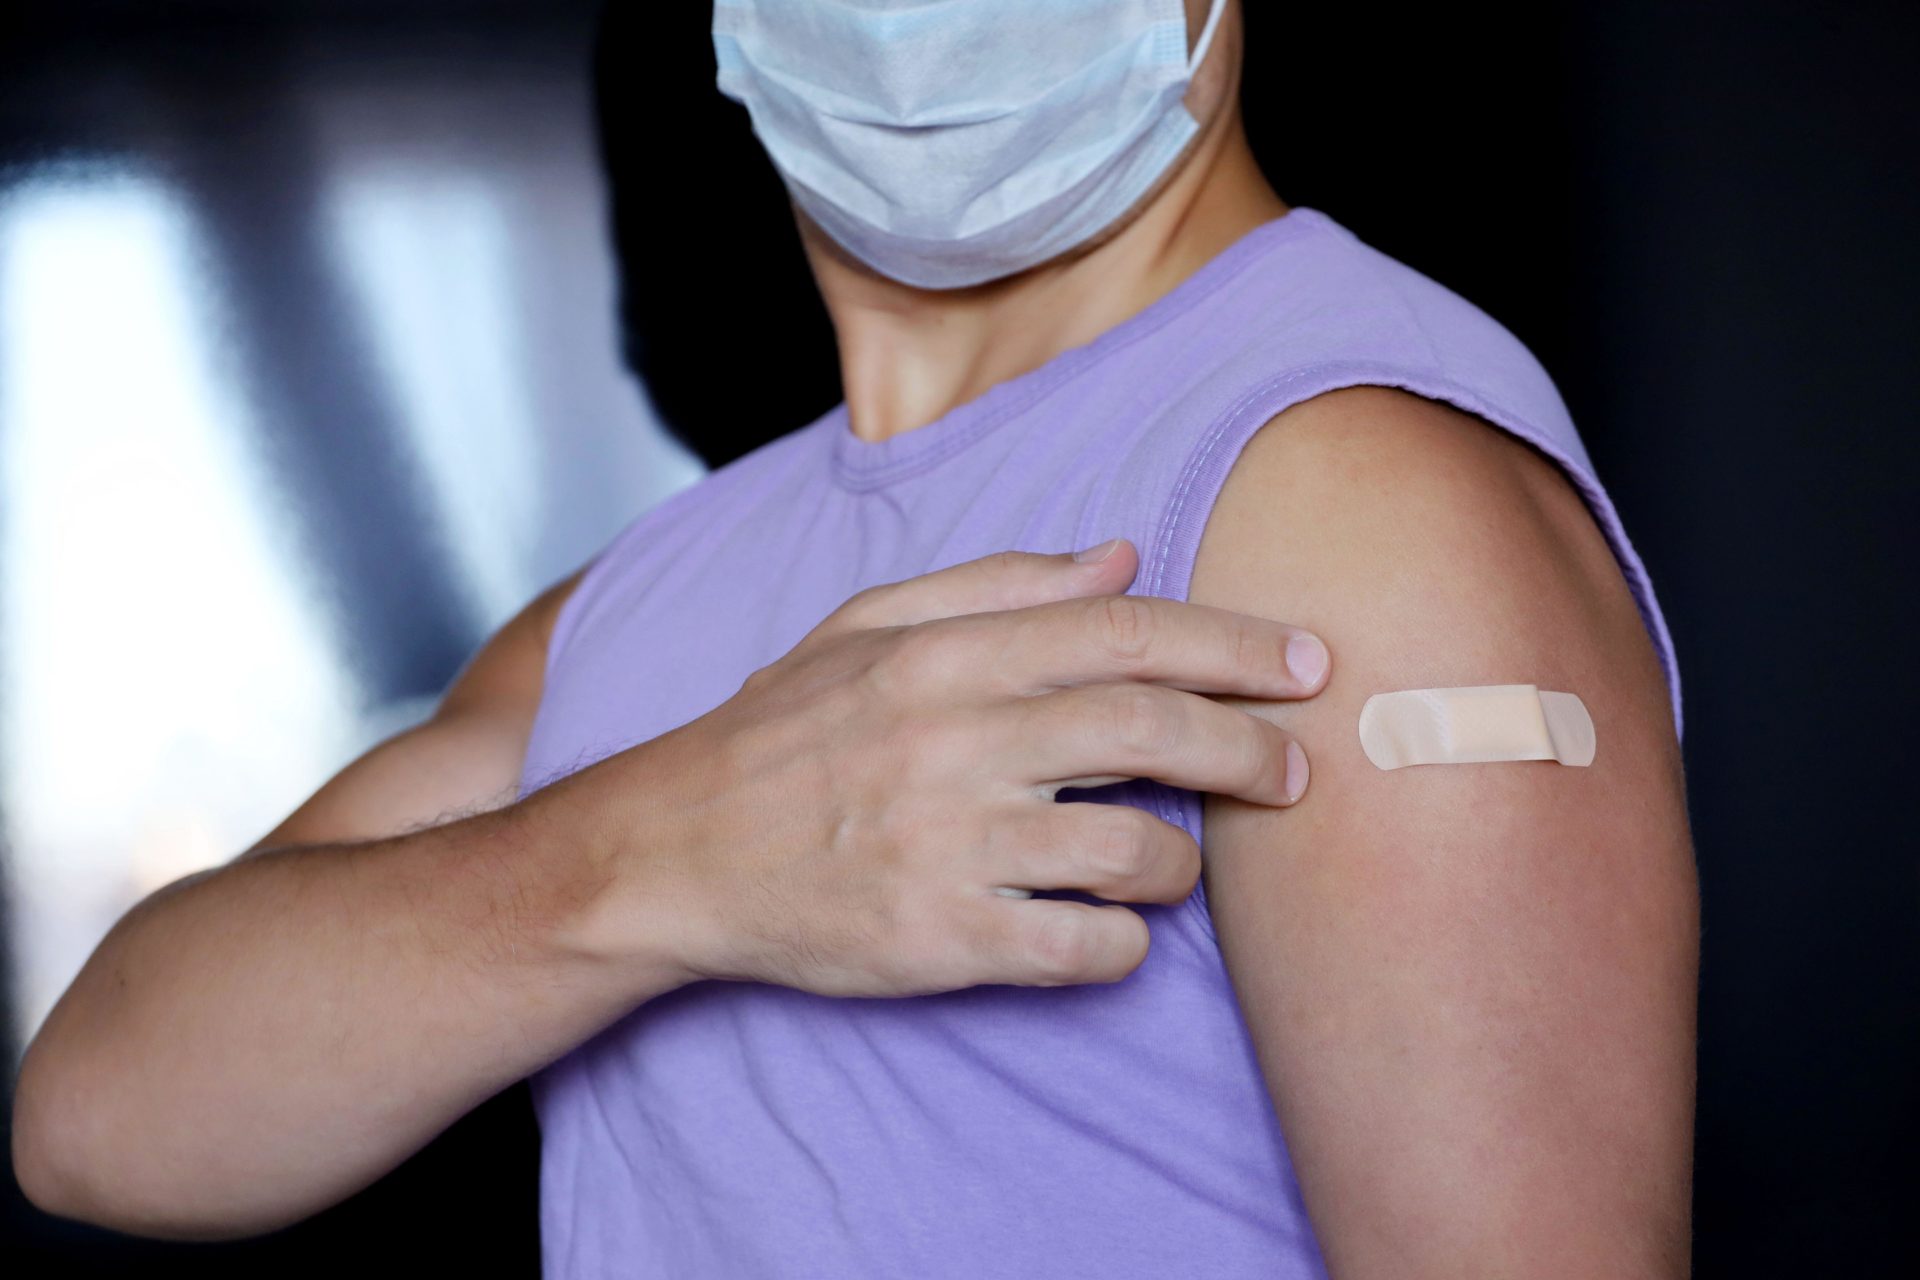 A man showing his arm with a bandage after receiving a vaccine.